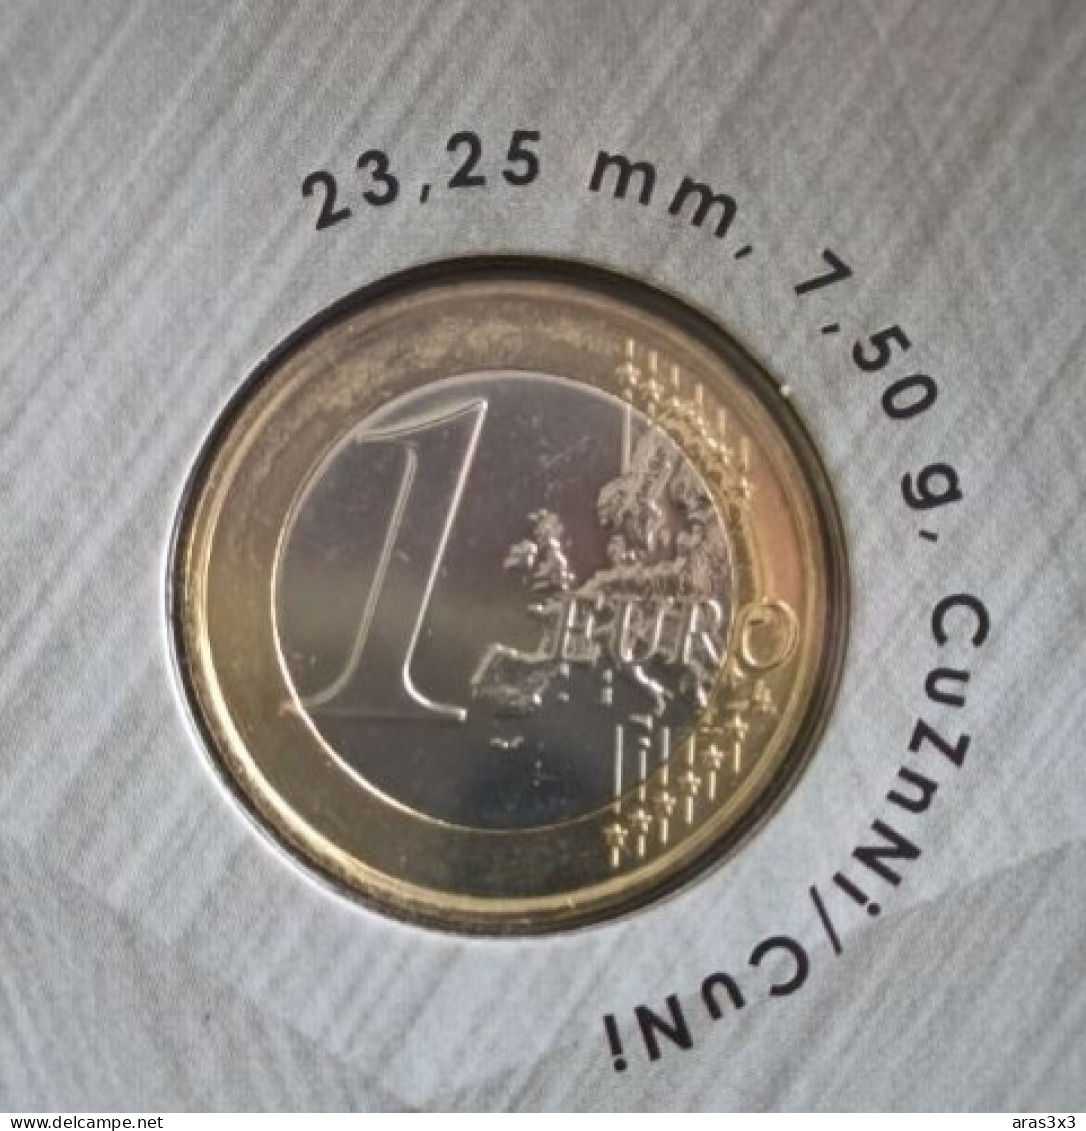 Original The first set of euros in Lithuania 2015 . Euro coins Lithuania . Uncirculated Quality BU